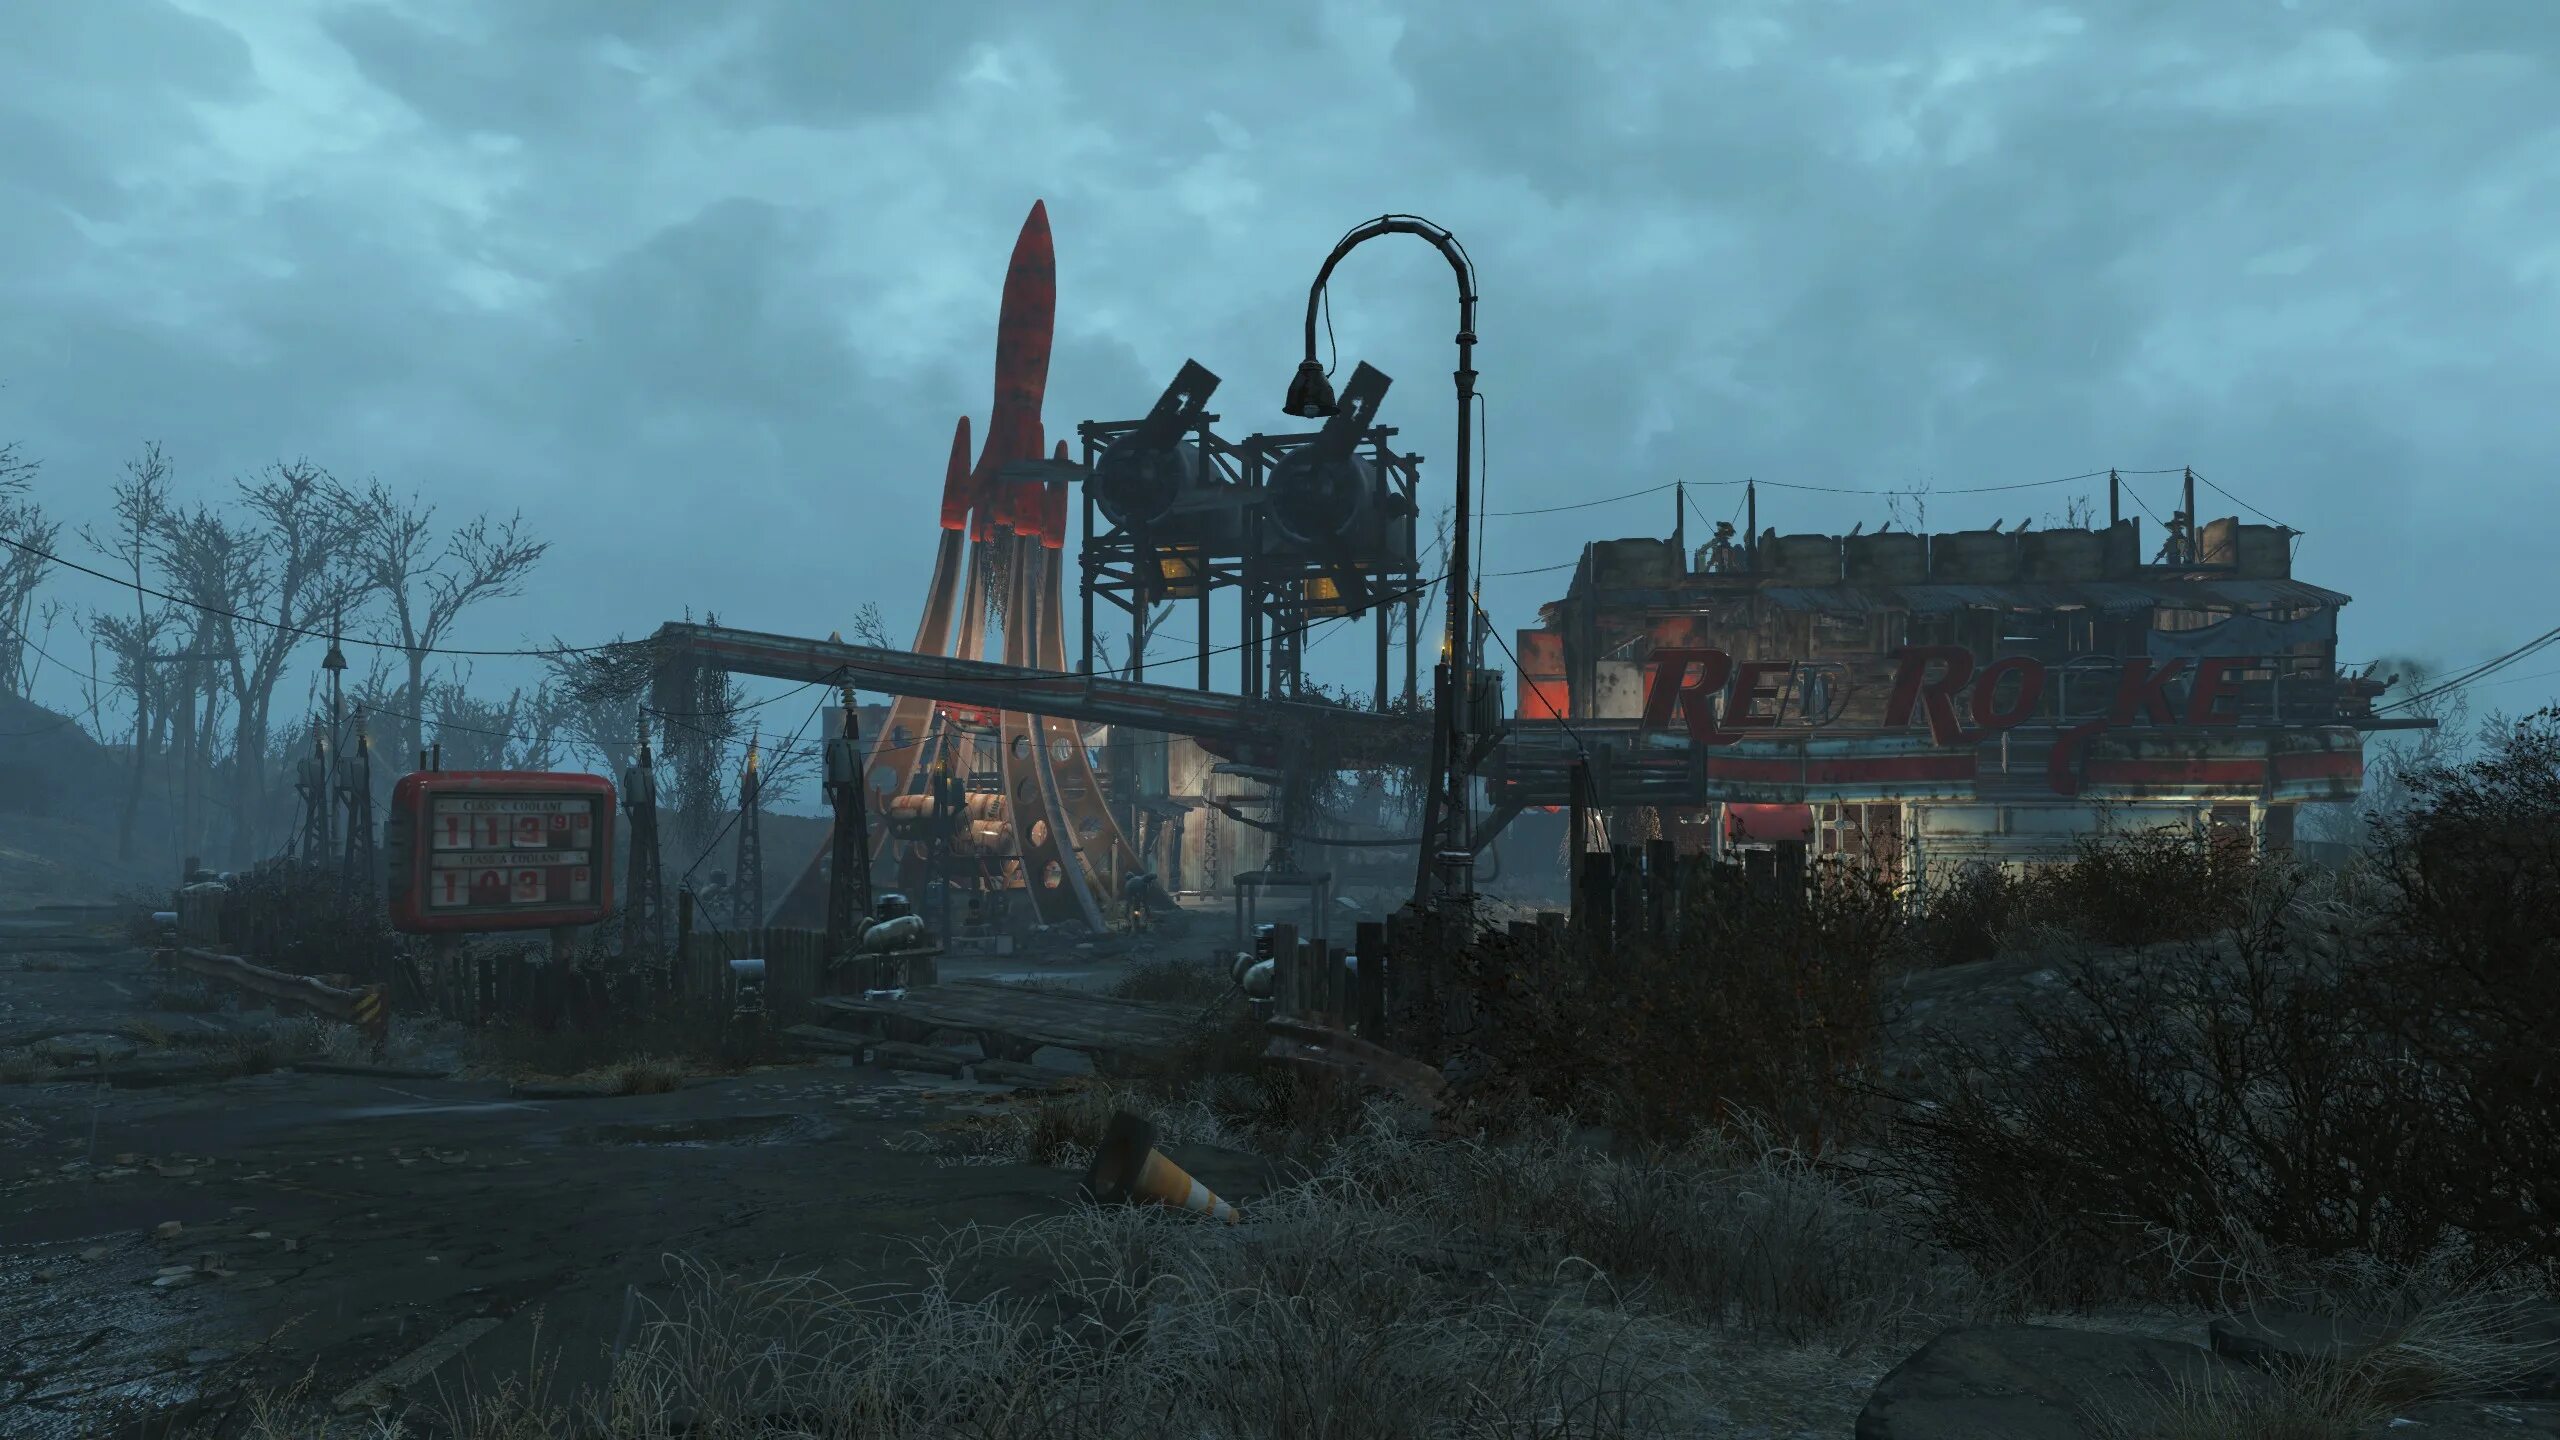 Fallout 4 Red Rocket. Фоллаут Red Rocket. Красная ракета фоллаут 4. Красная ракета фаллаут4. Красивый фоллаут 4